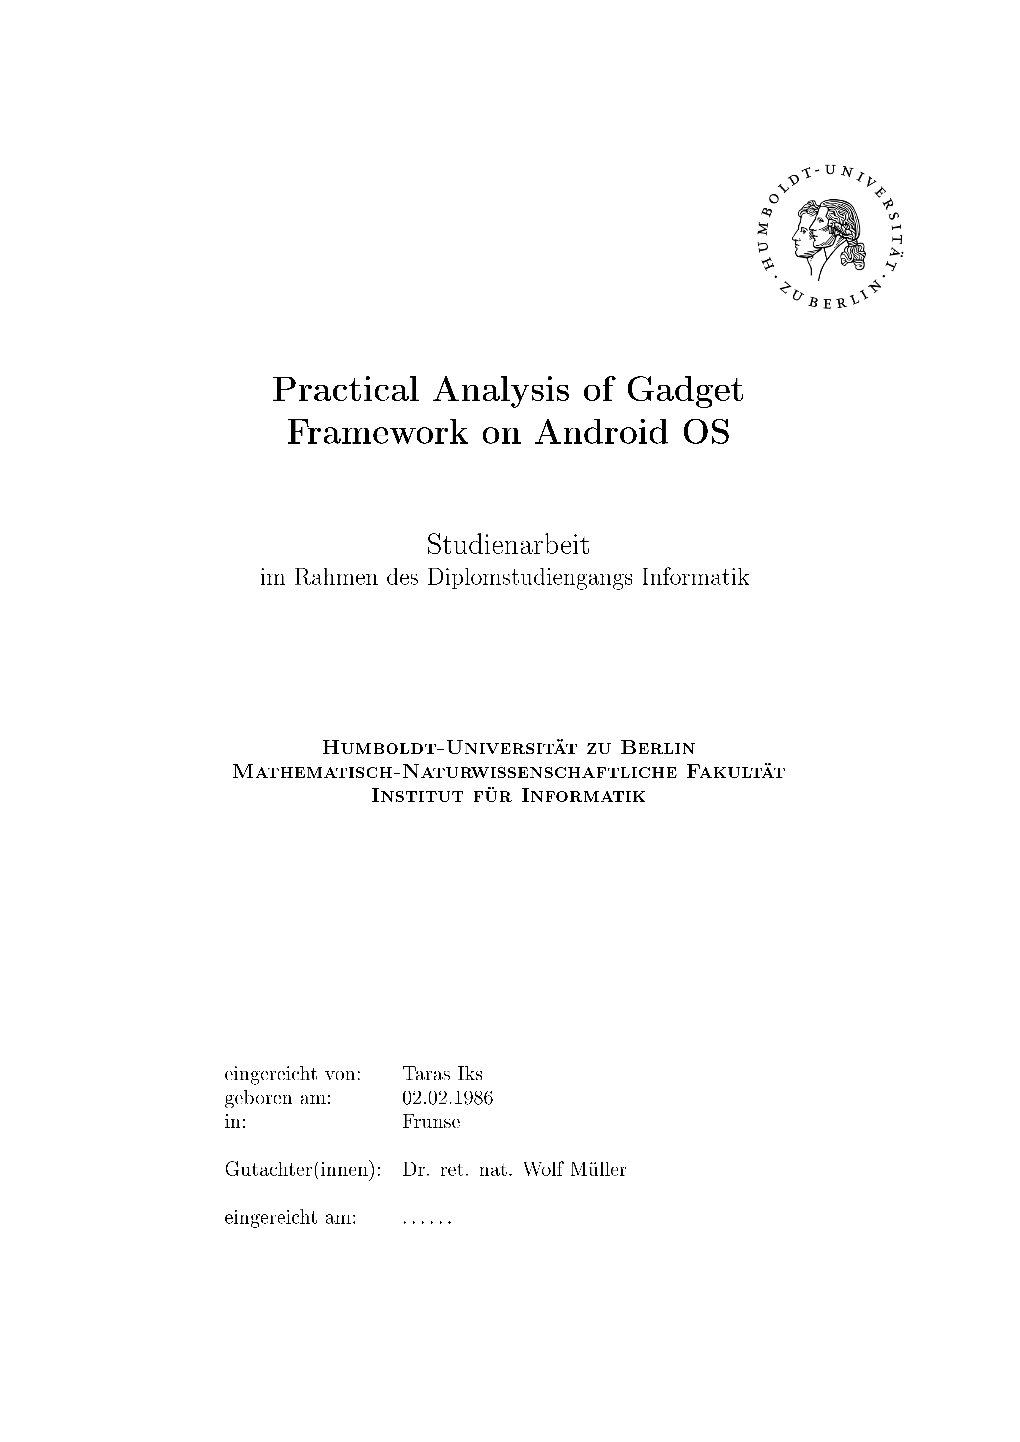 Practical Analysis of Gadget Framework on Android OS